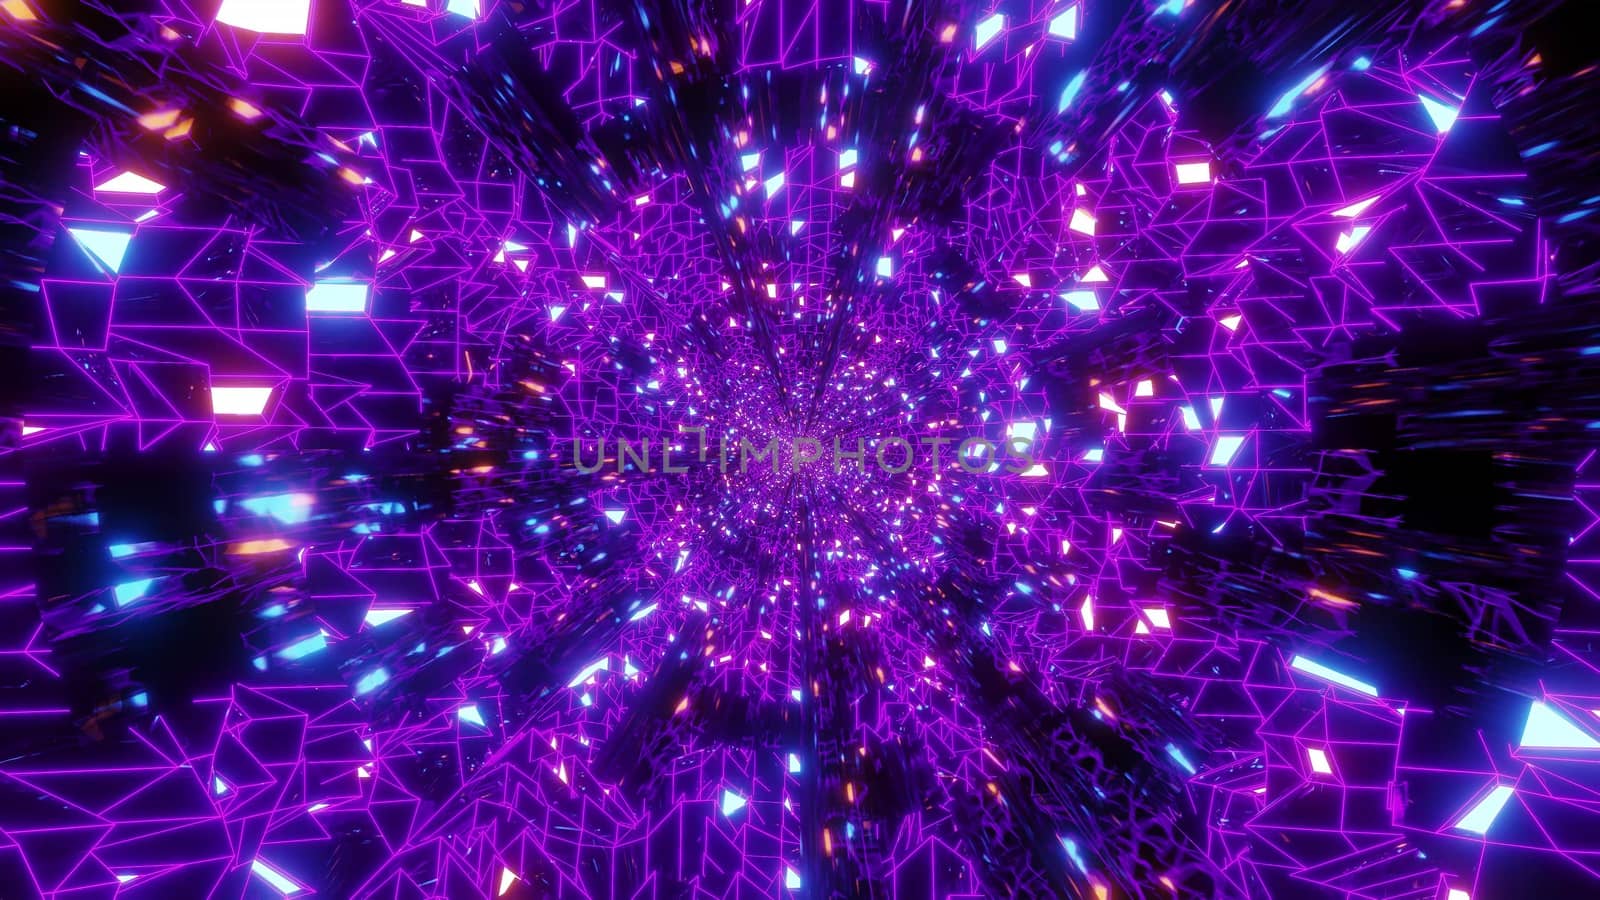 abstract wireframe design space galaxy 3d illustration wallpaper background by tunnelmotions